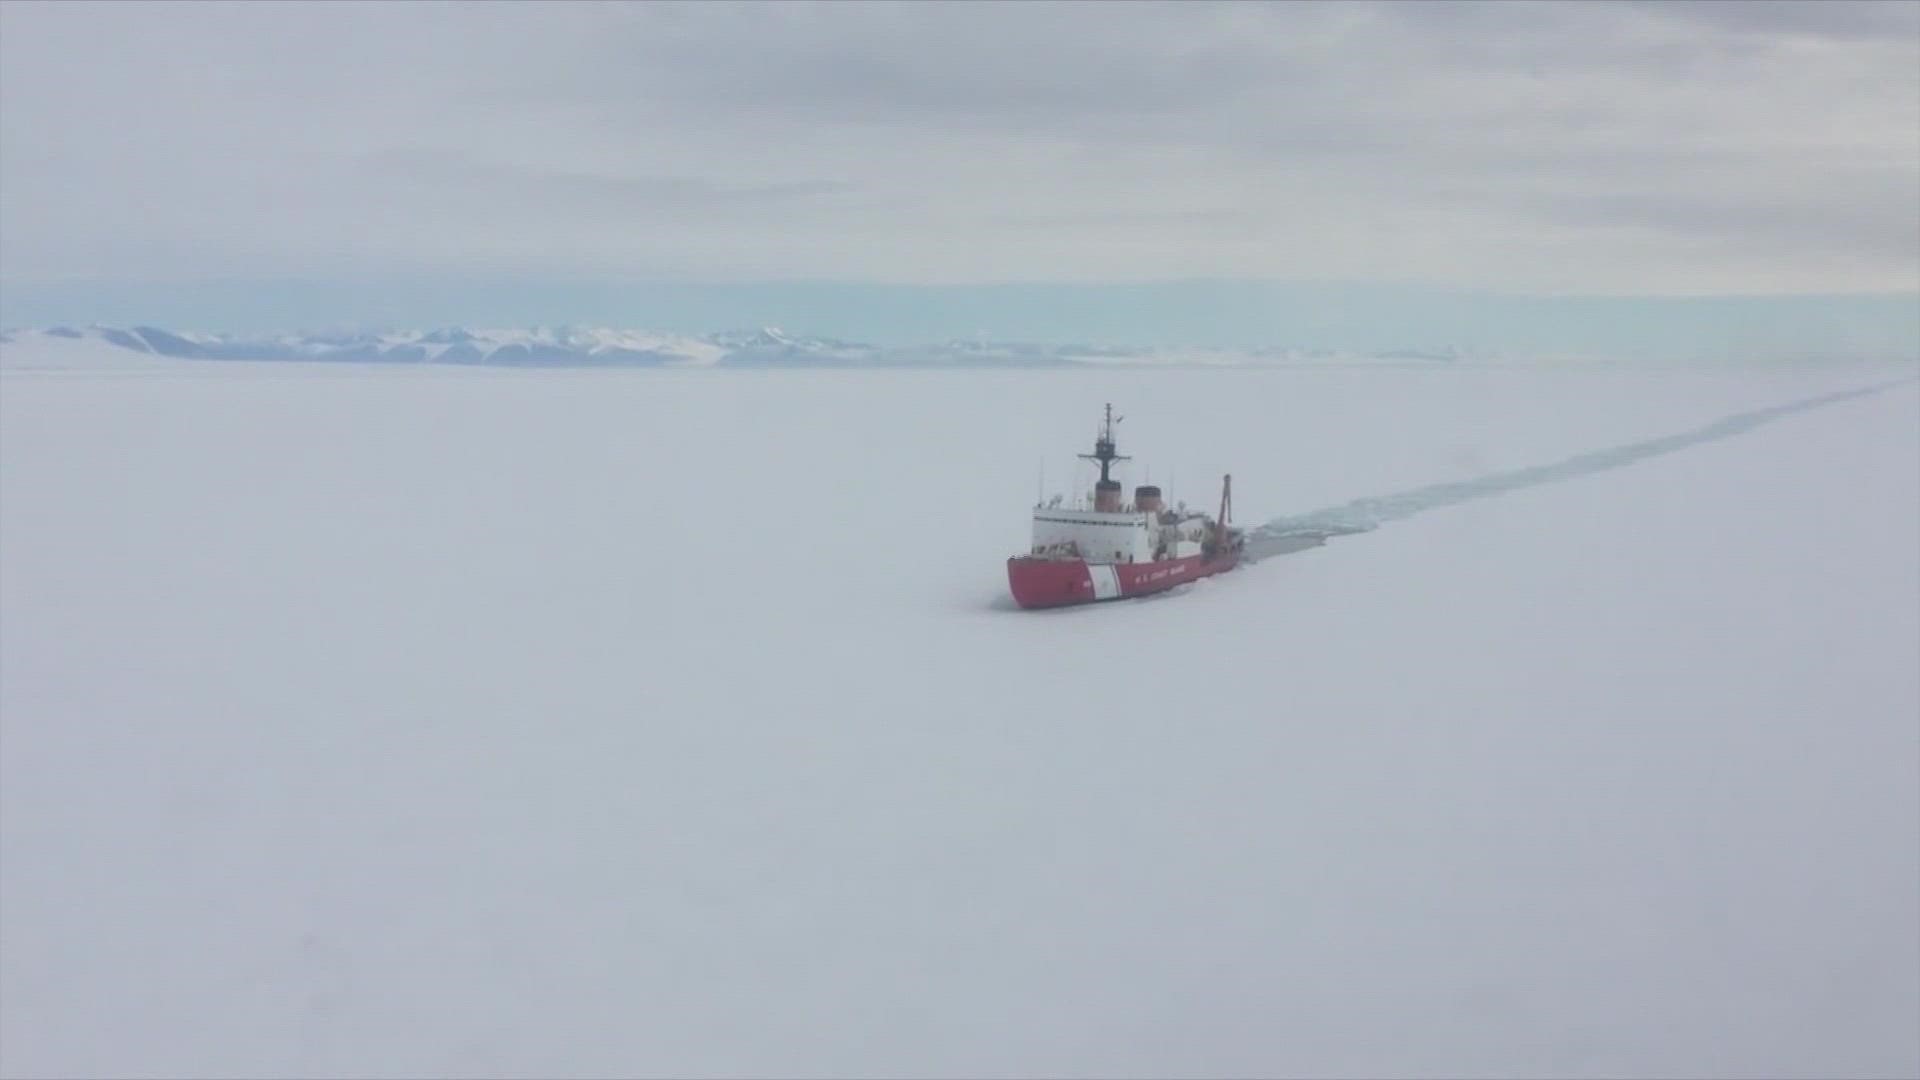 The massive ice-breaking vessel plays a critical role in maintaining a clear path to the McMurdo Station, a U.S. research facility.